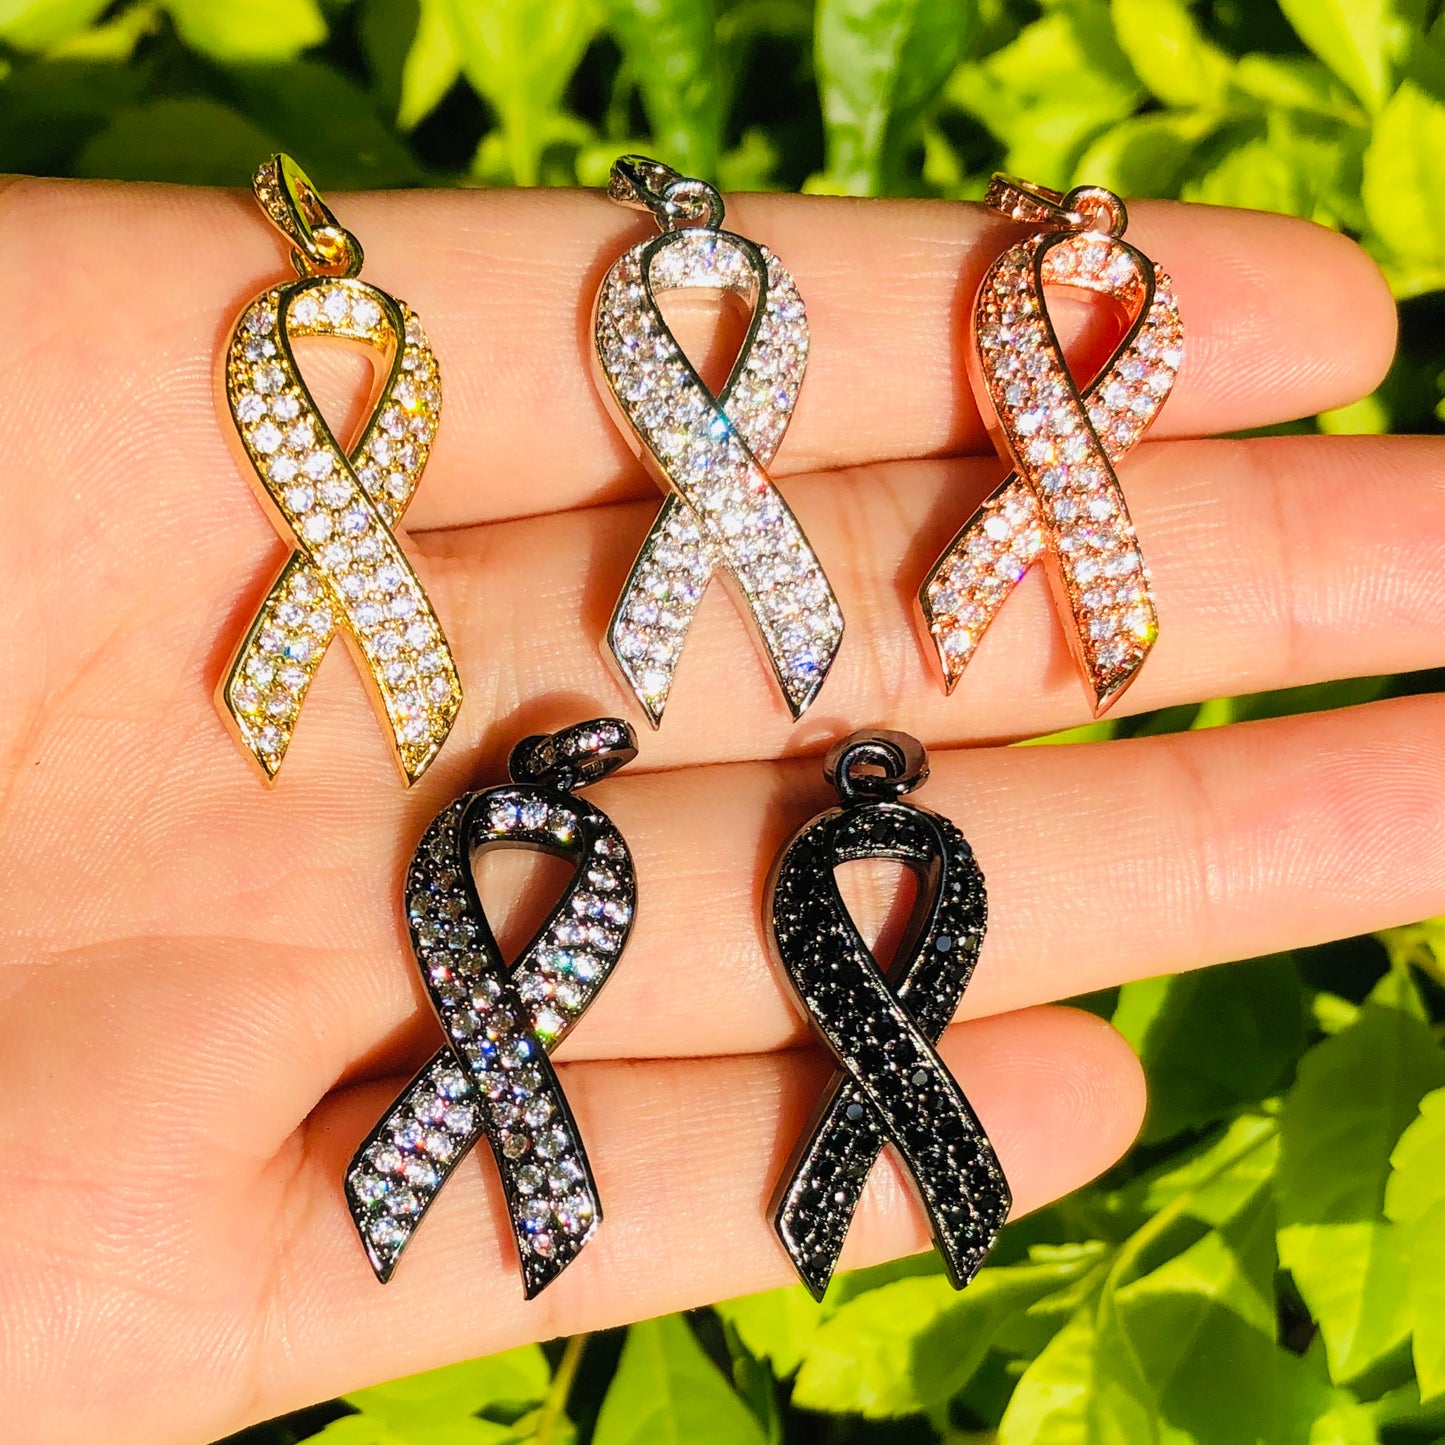 10pcs/lot 27*13mm CZ Paved Pink Ribbon Breast Cancer Awareness Charms Mix Color CZ Paved Charms Breast Cancer Awareness Charms Beads Beyond